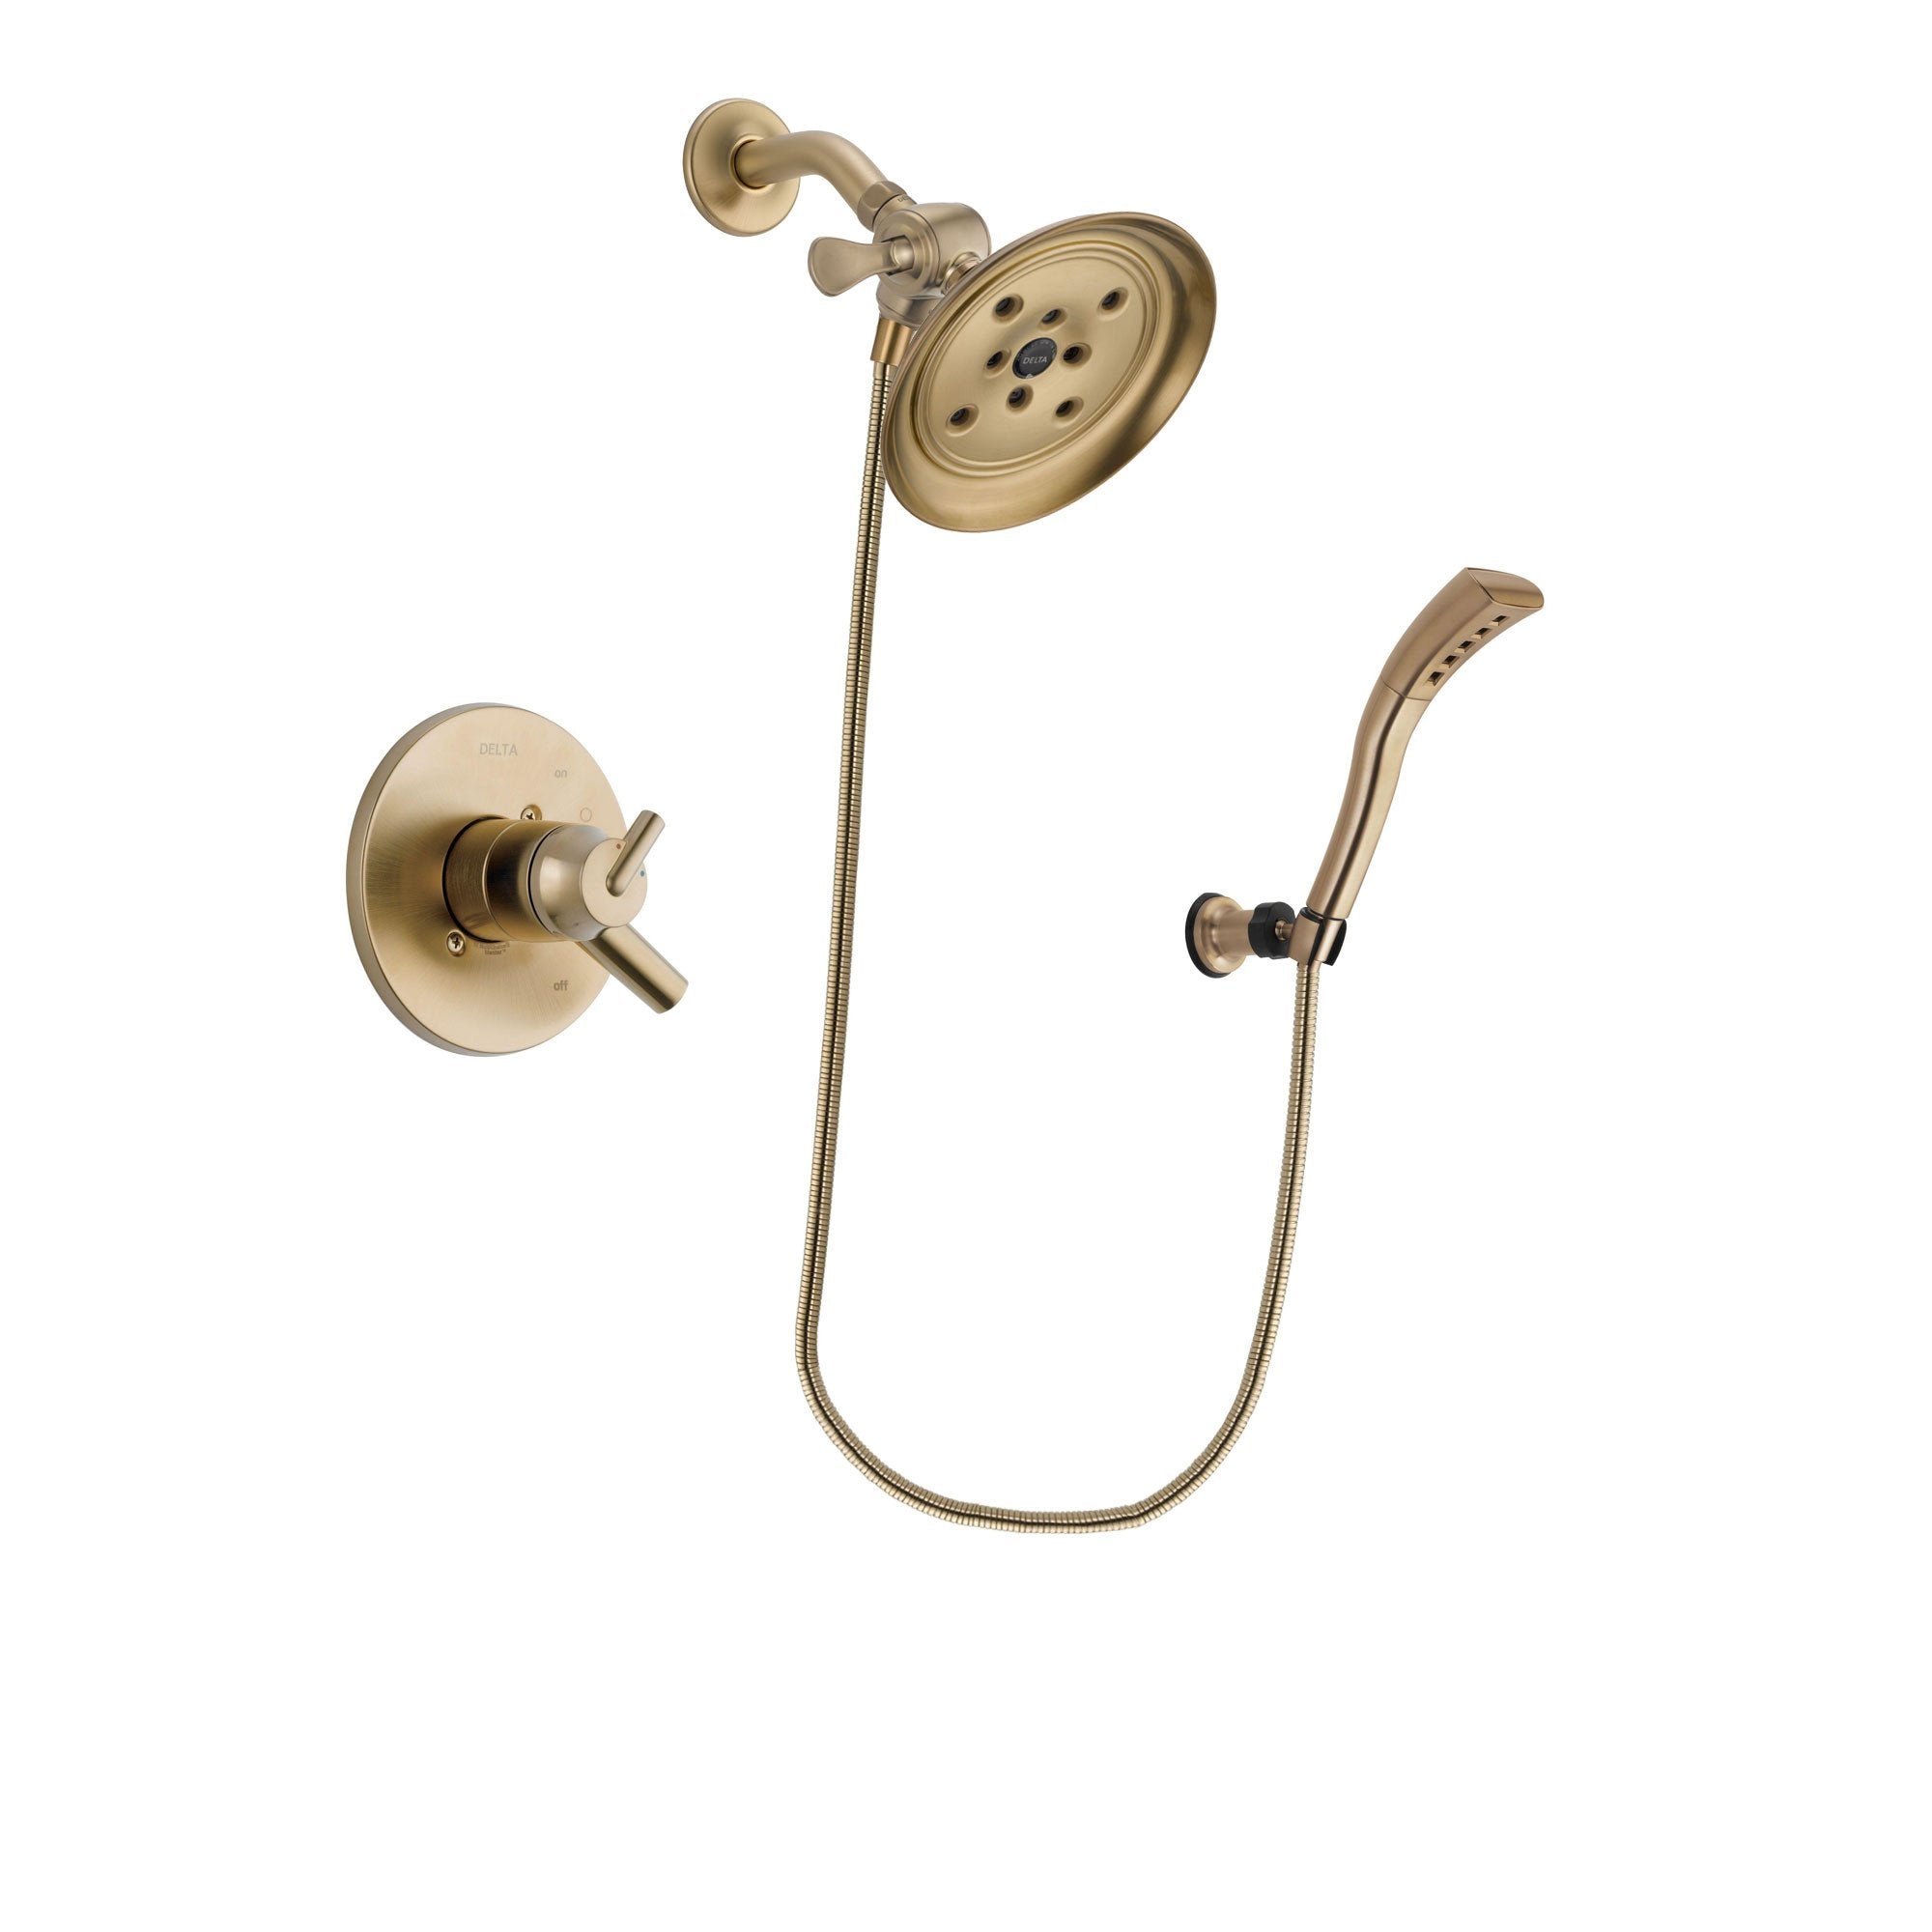 Delta Trinsic Champagne Bronze Finish Dual Control Shower Faucet System Package with Large Rain Shower Head and Modern Wall Mount Personal Handheld Shower Spray Includes Rough-in Valve DSP3700V